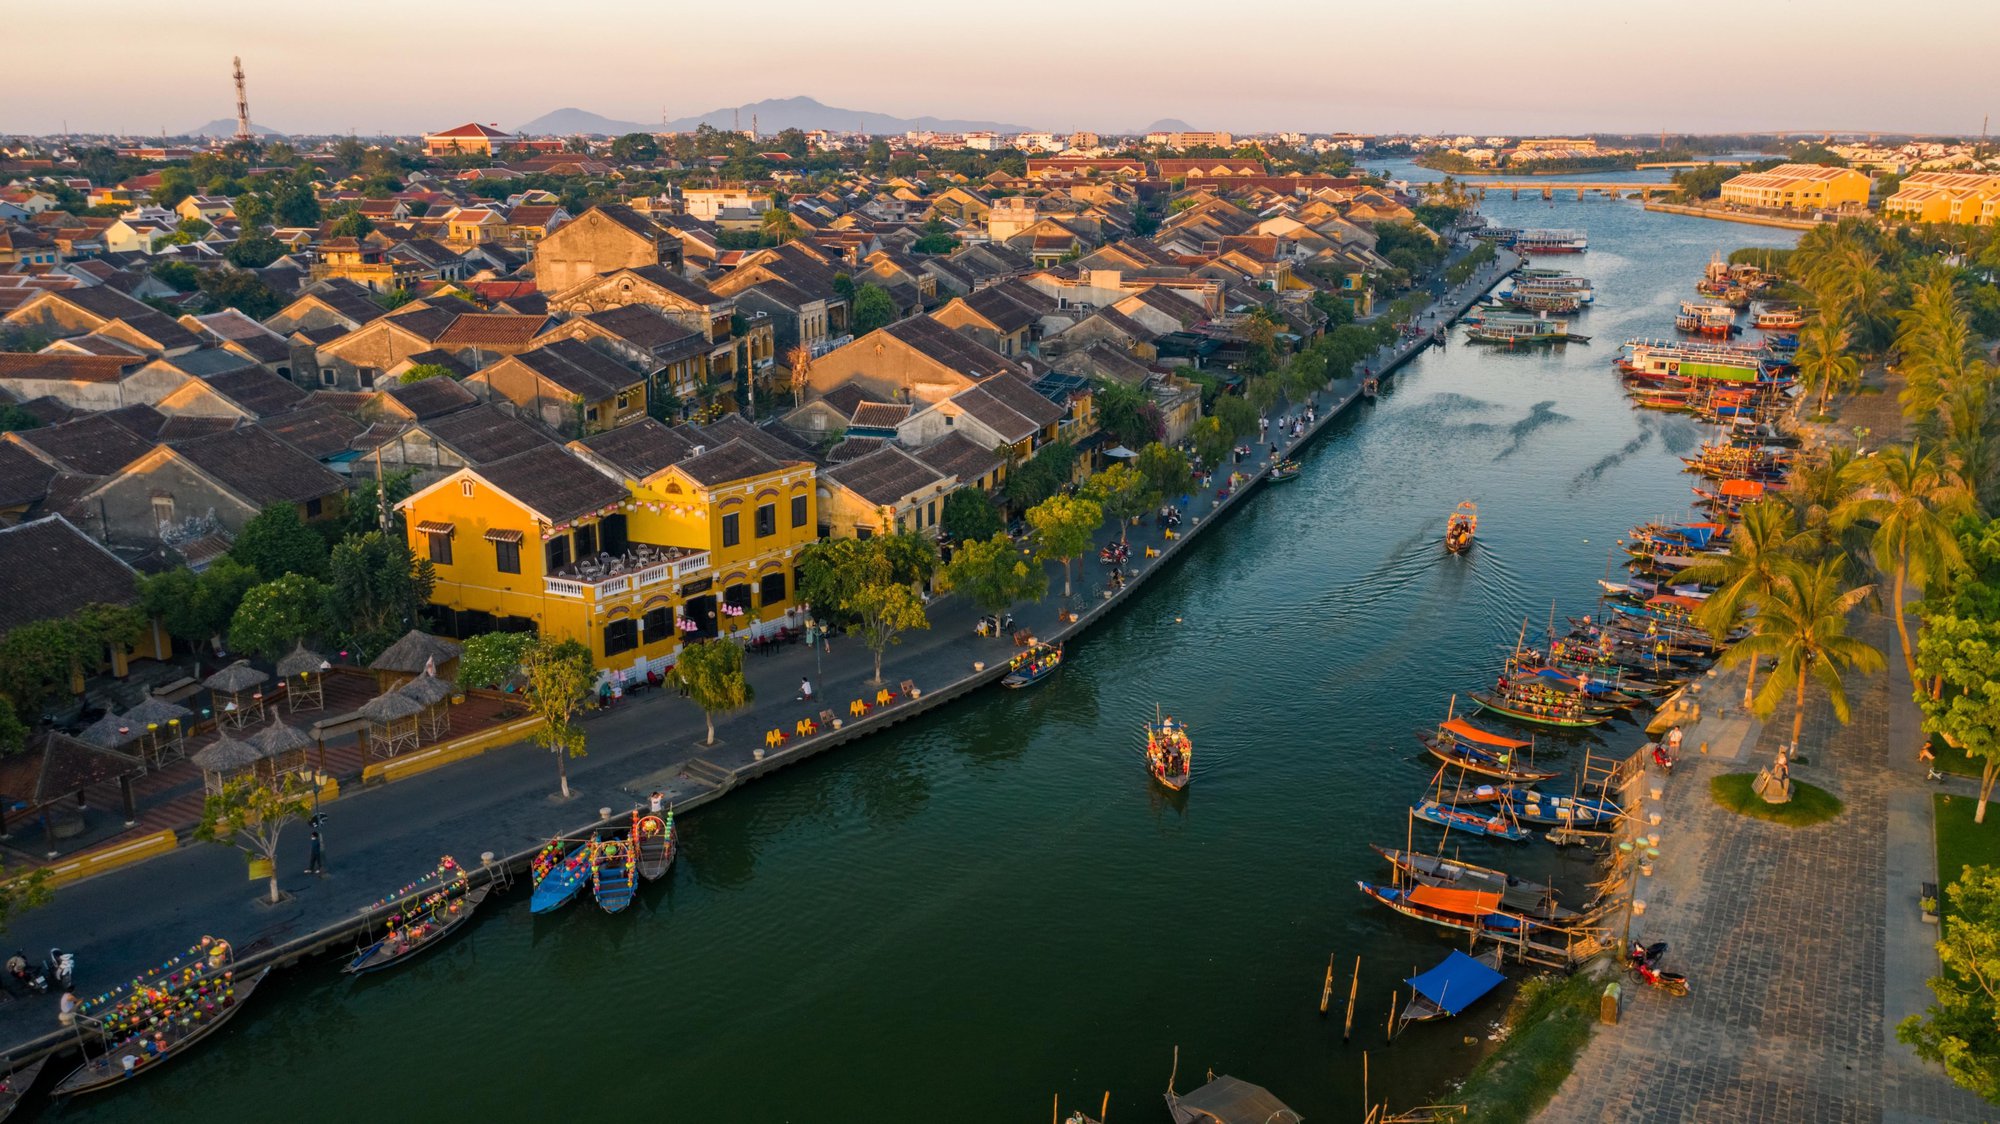 Hoi An History Part 1] - Discovering the busiest port in Southeast Asia -  Da Nang Leisure